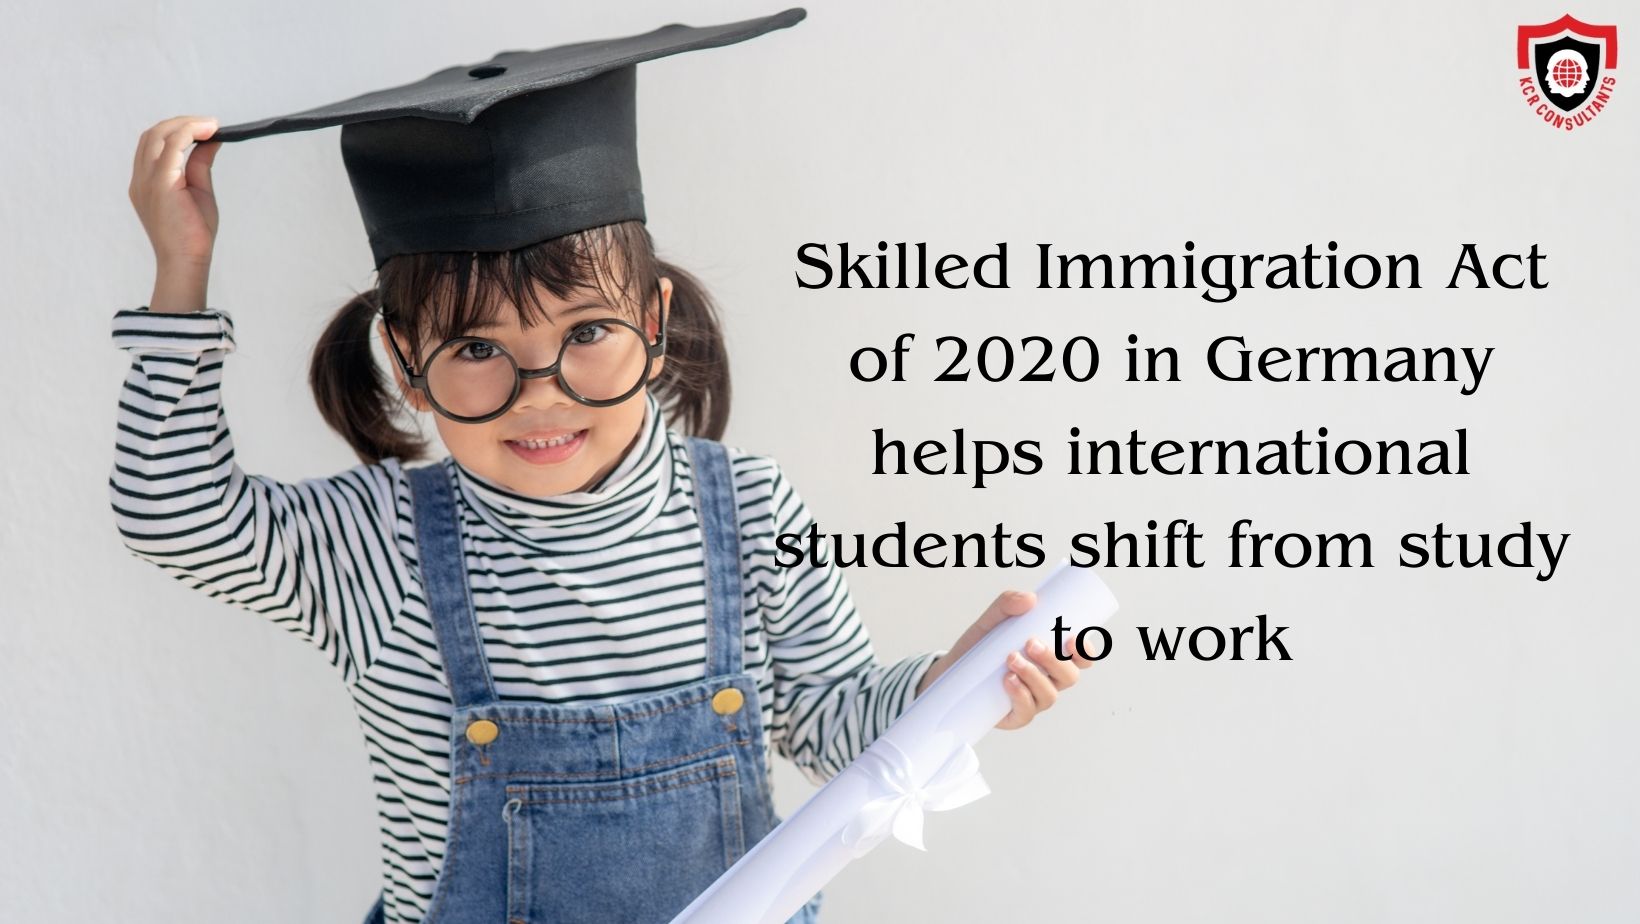 STUDY IN GERMANY - KCR CONSULTANTS - Skilled Immigration Act of 2020